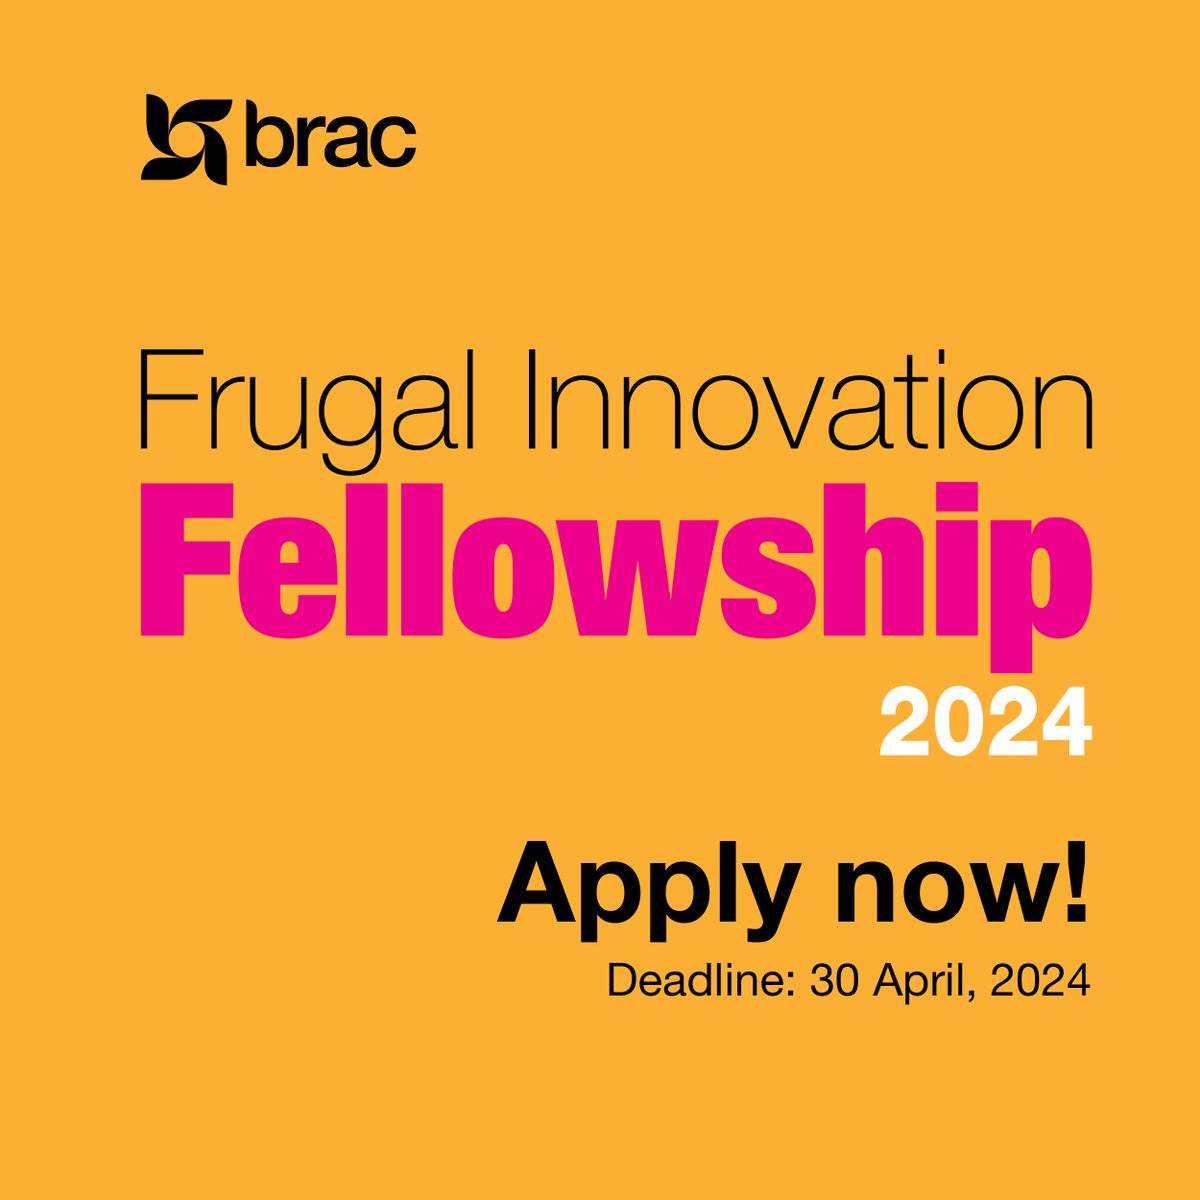 Are you a social entrepreneur or social activist working in climate adaptation? Are you looking for opportunities to test your idea and scale up? BRAC has launched the Frugal Innovation Fellowship 2024 for applicants from Uganda, Tanzania, Rwanda, South Sudan, Kenya, and